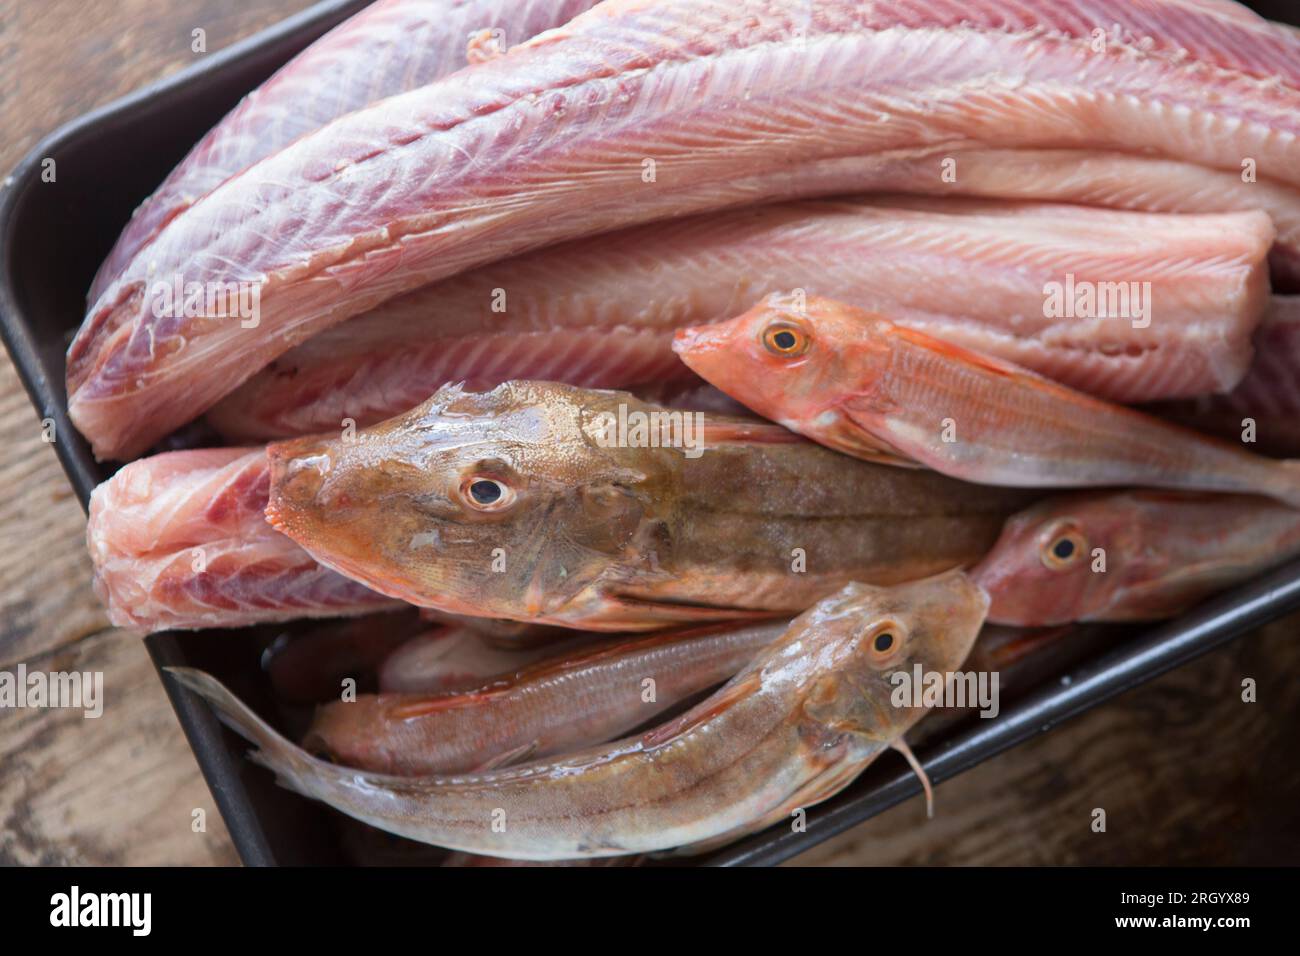 Skinned smooth hound sections and red and tub gurnards in the foreground, that are going to be cooked in a fish stew or bouillabaisse. England UK GB Stock Photo